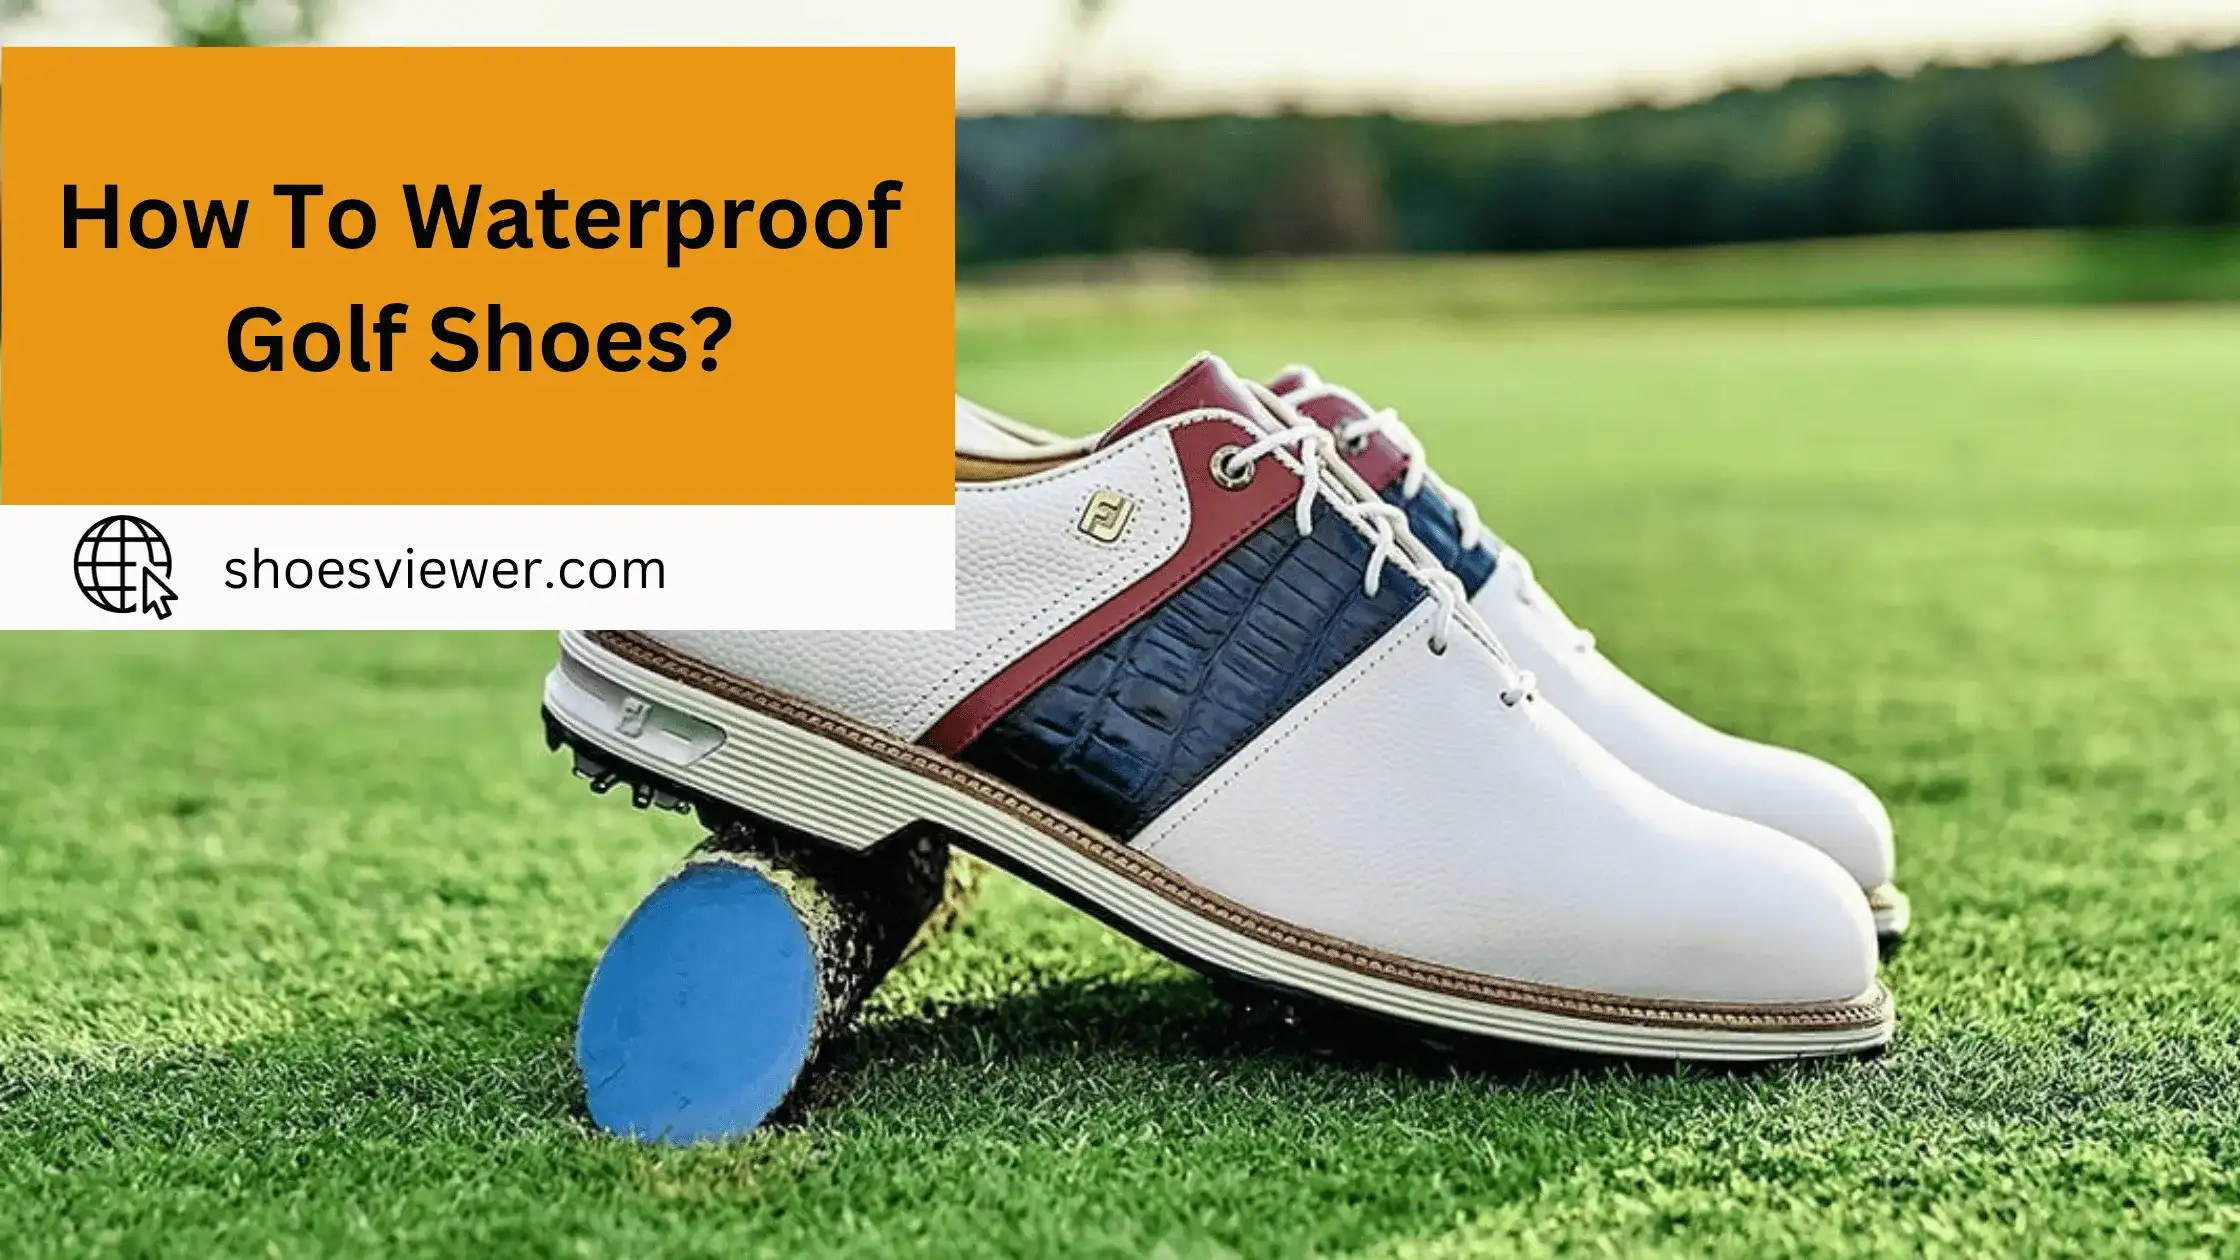 How To Waterproof Golf Shoes? Easy Guide For Everyone